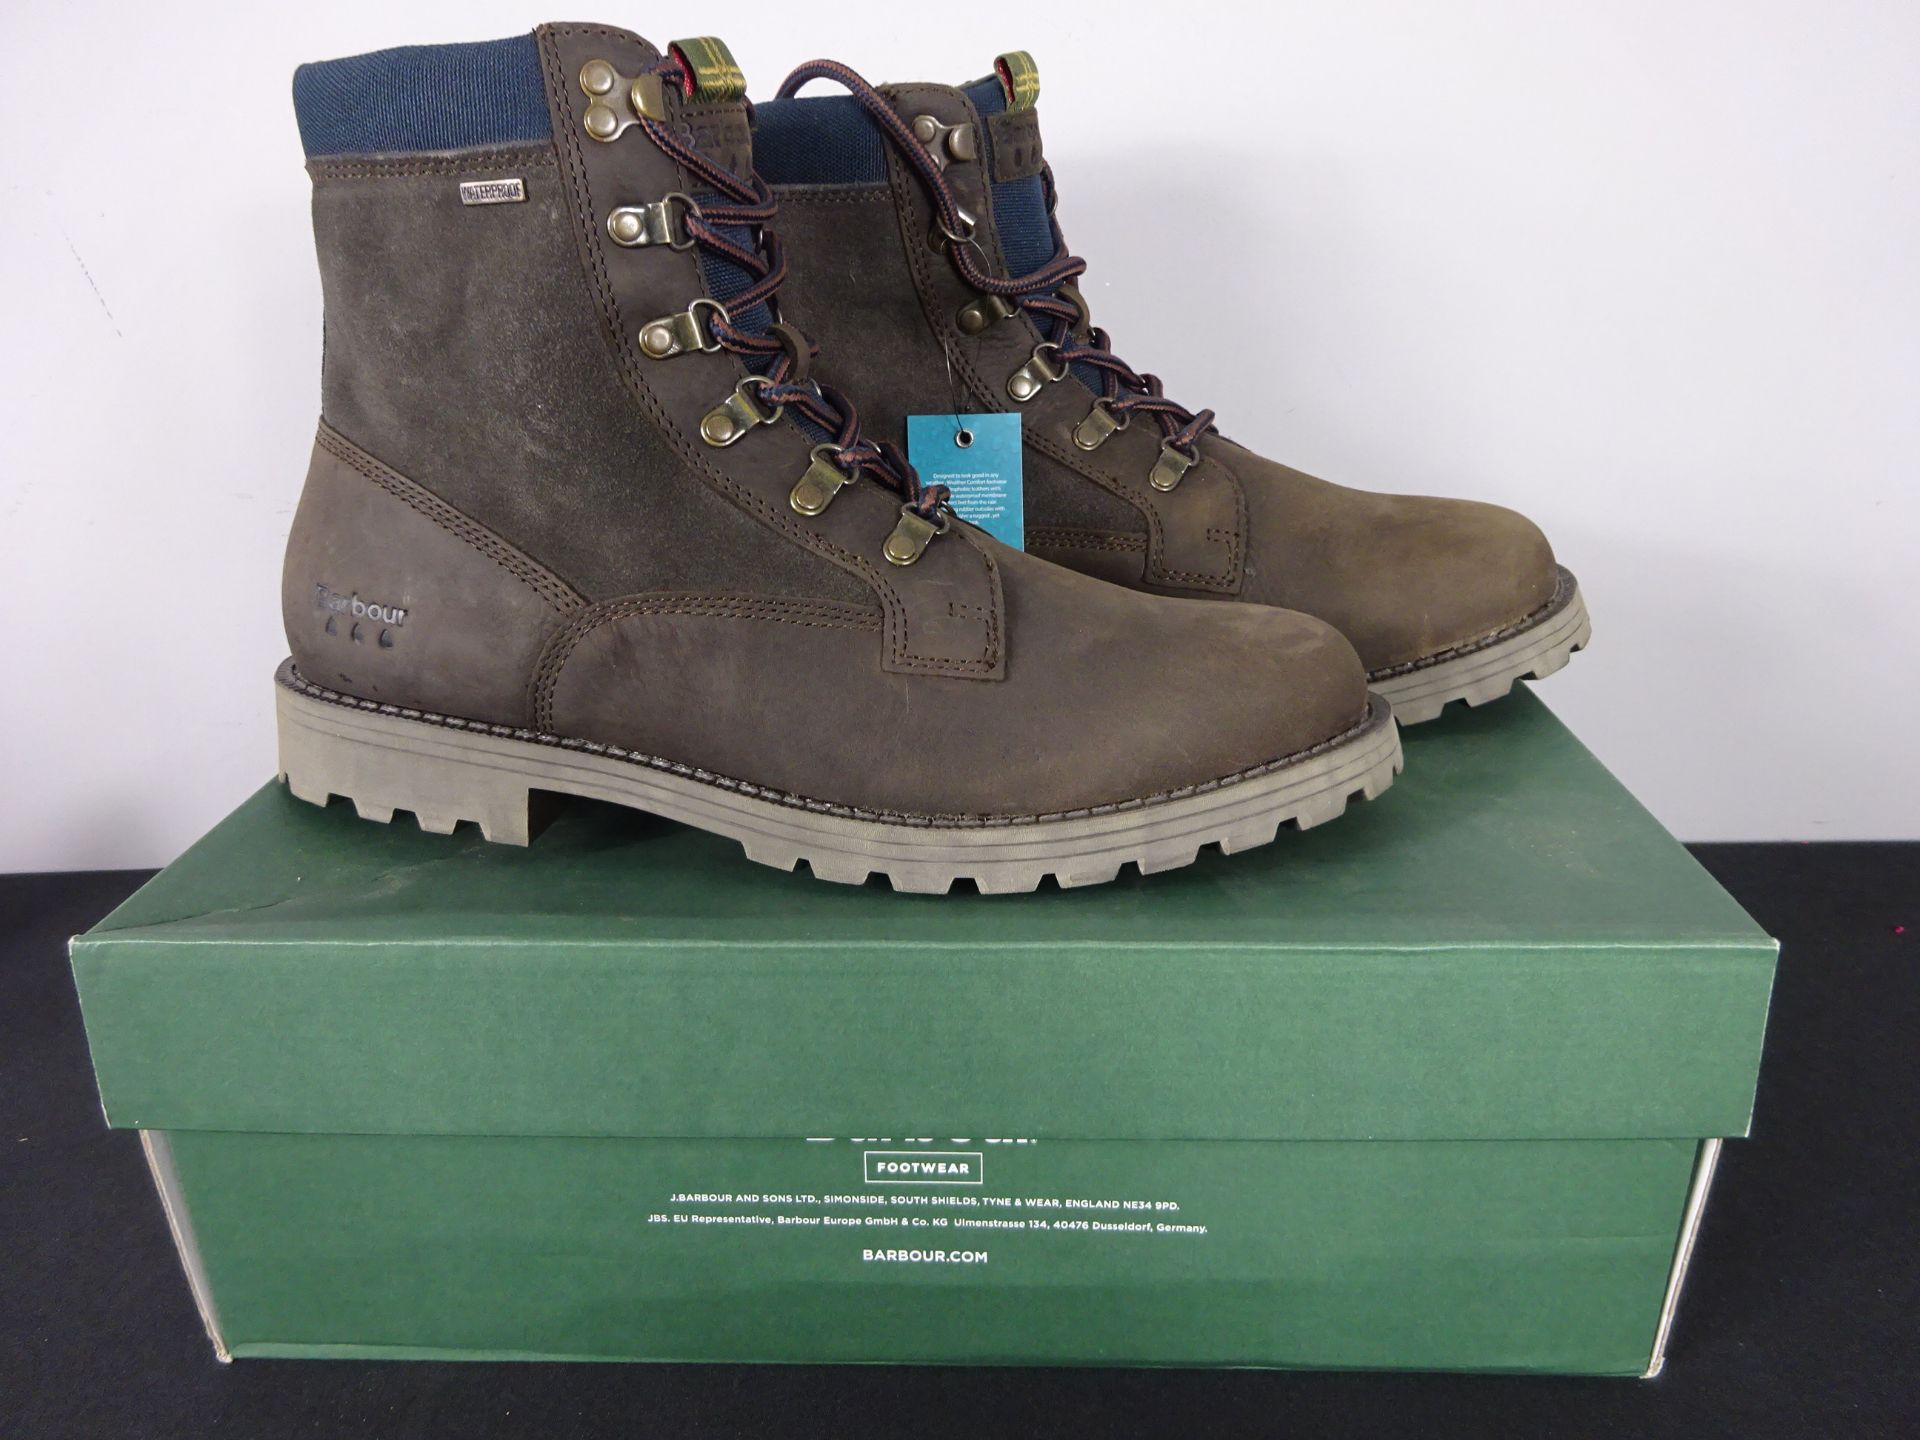 RRP £129.99 - New Barbour Chiltern Boots - Size 8.